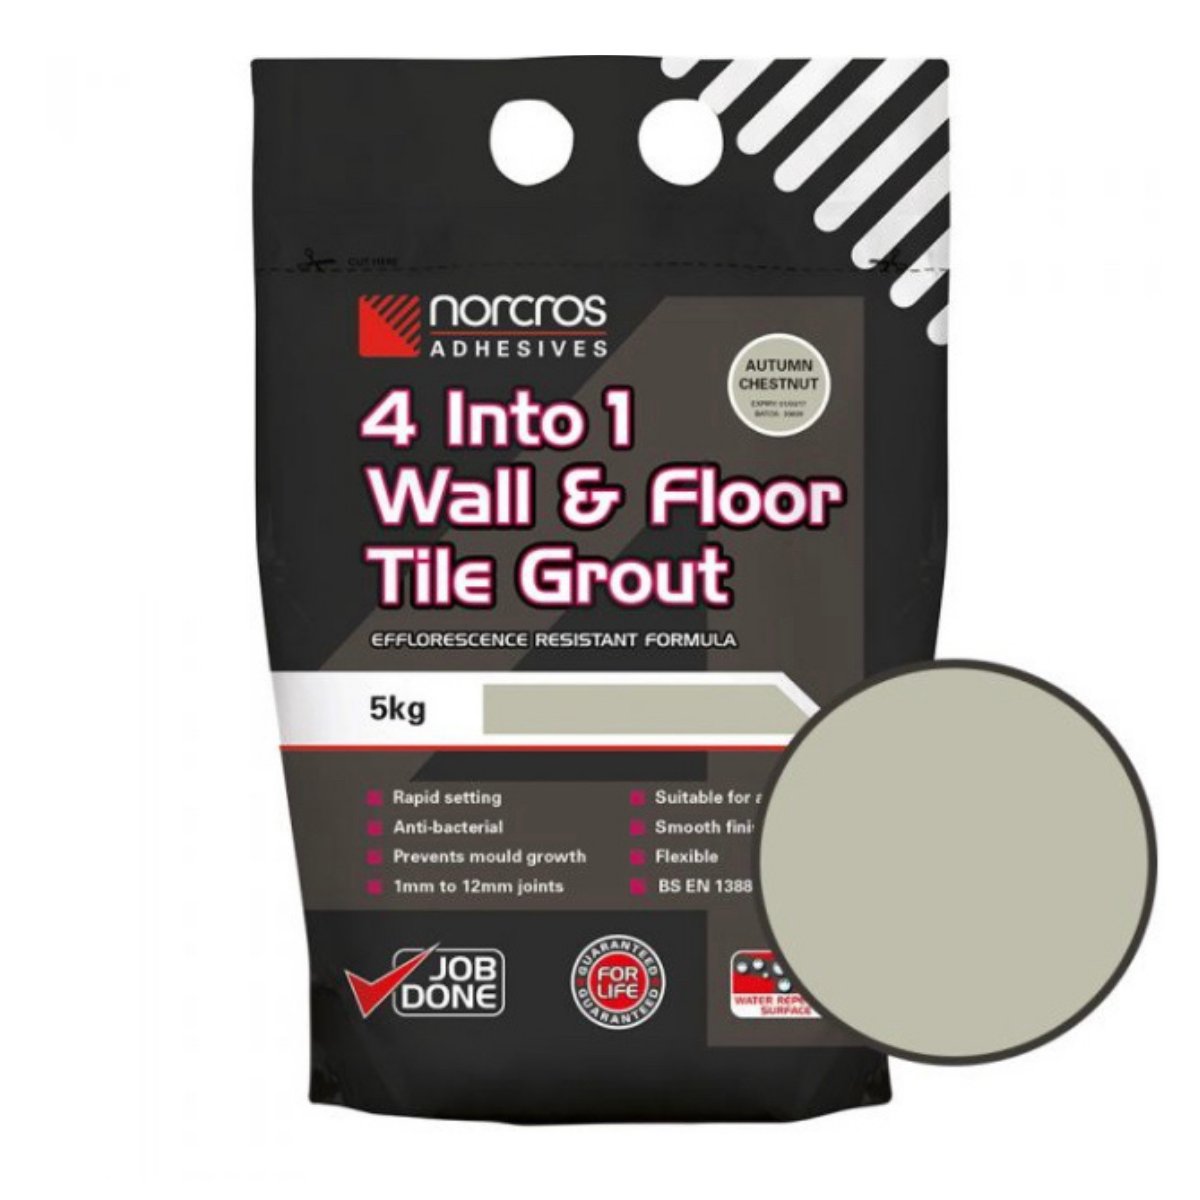 Need tile grout in a hurry?
We have all colours and variety available!
Shop the range at SmartPriceHunter.com
#grout #norcros #marketplace #diy #tilegrout